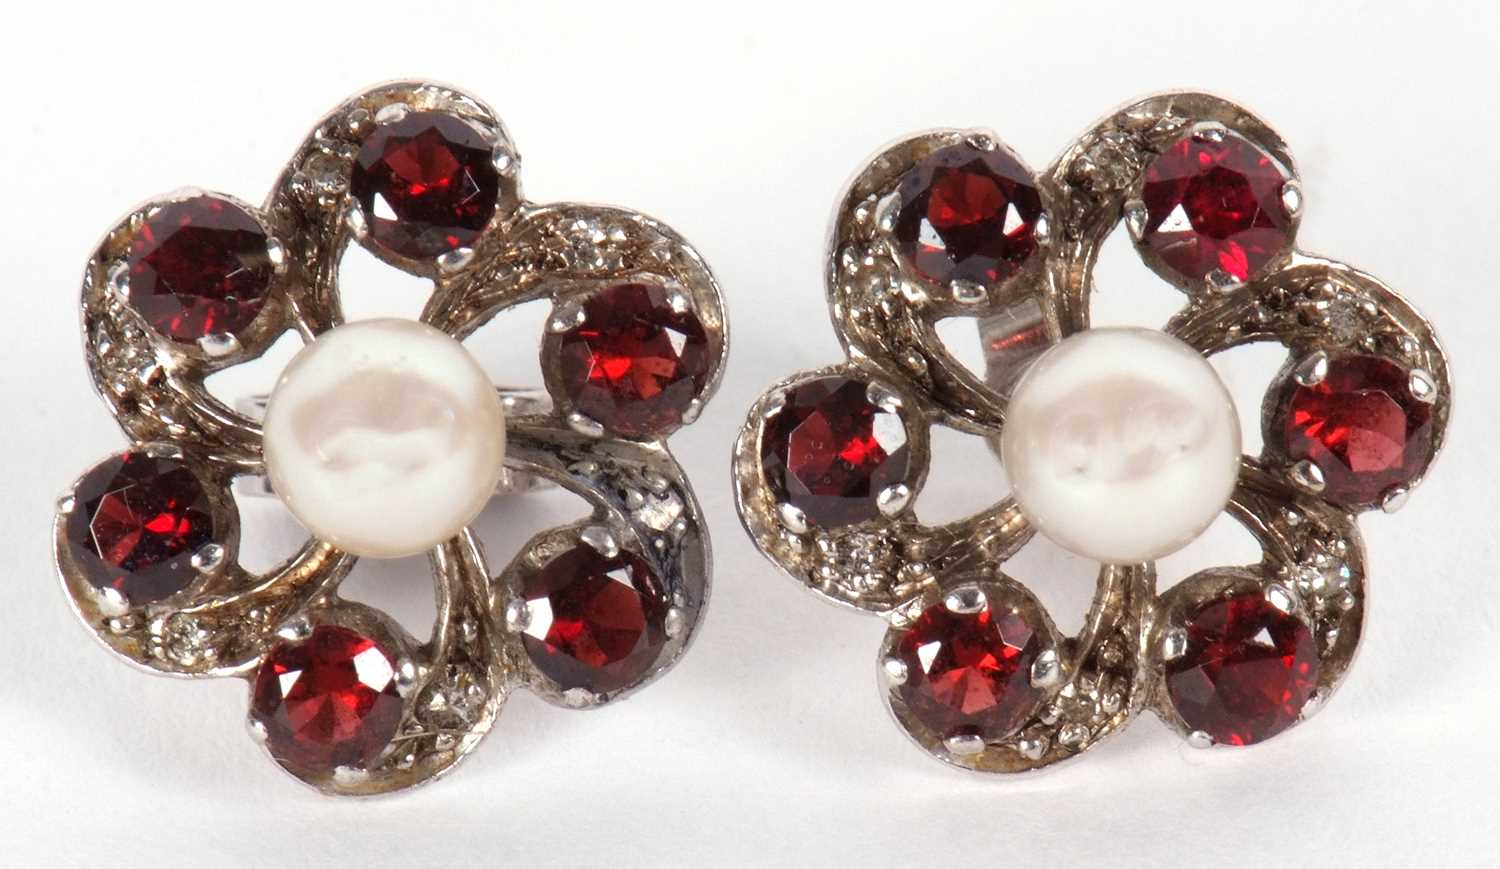 A pair of garnet, diamond and cultured pearl earrings, the central round cultured pearl surrounded